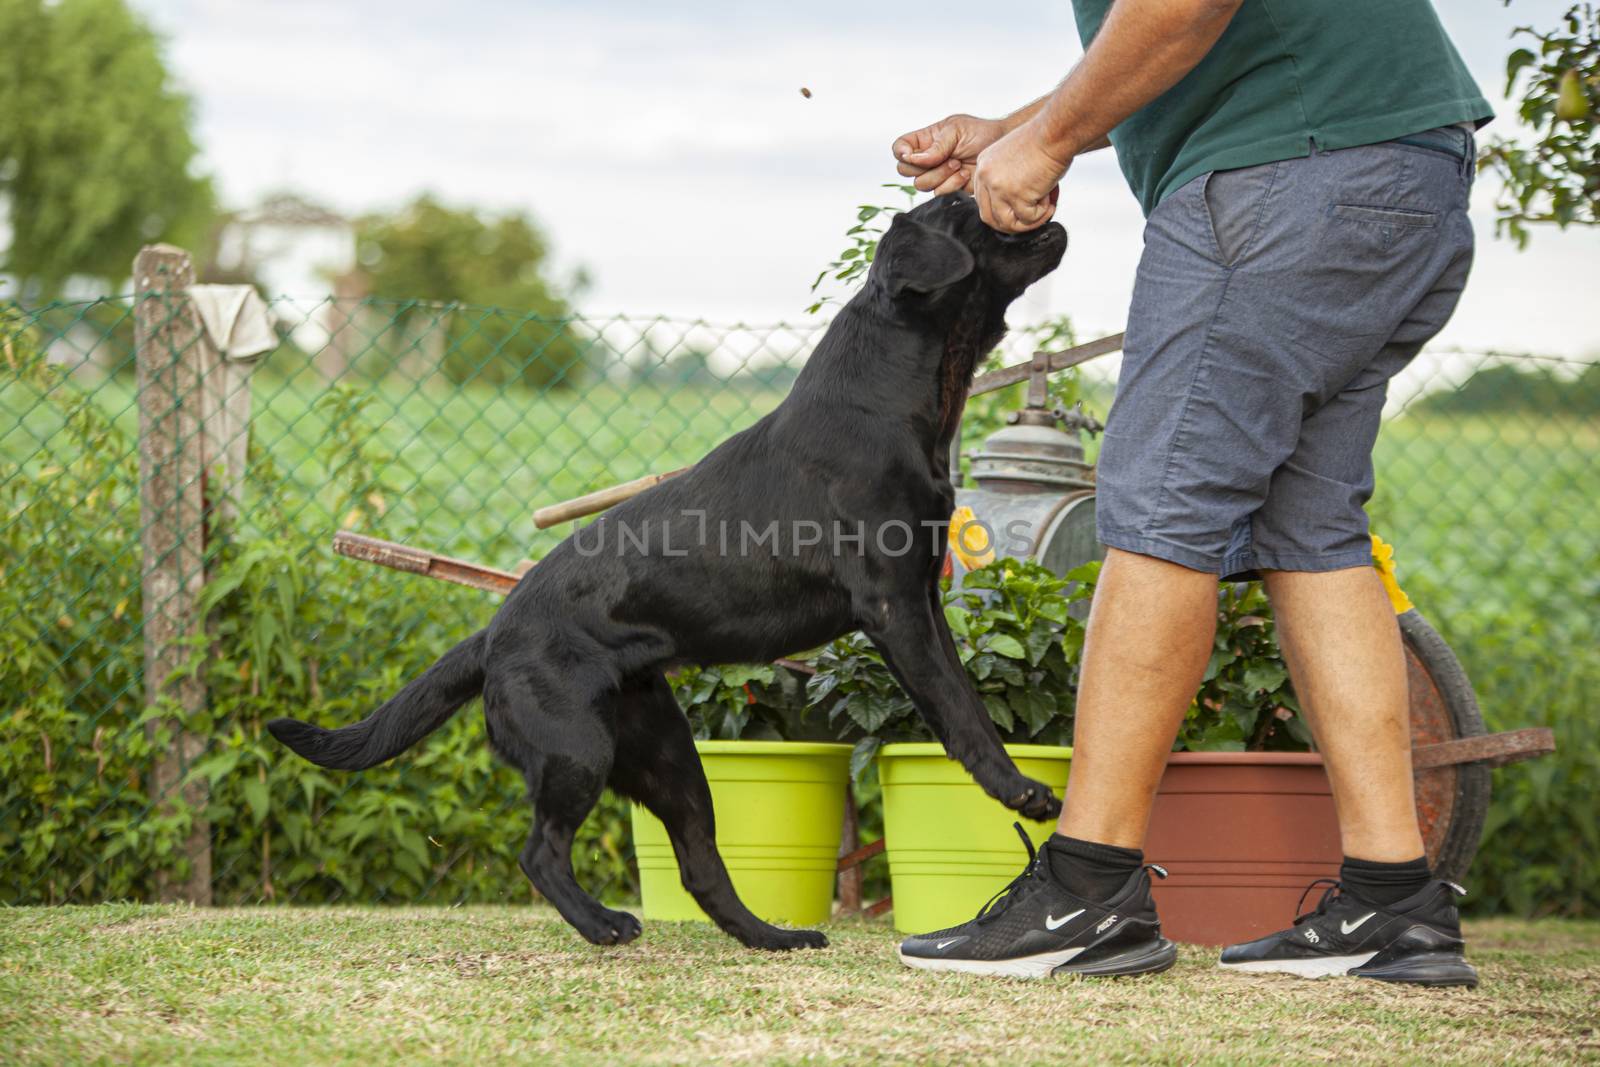 Labrador dog play in countryside 3 by pippocarlot